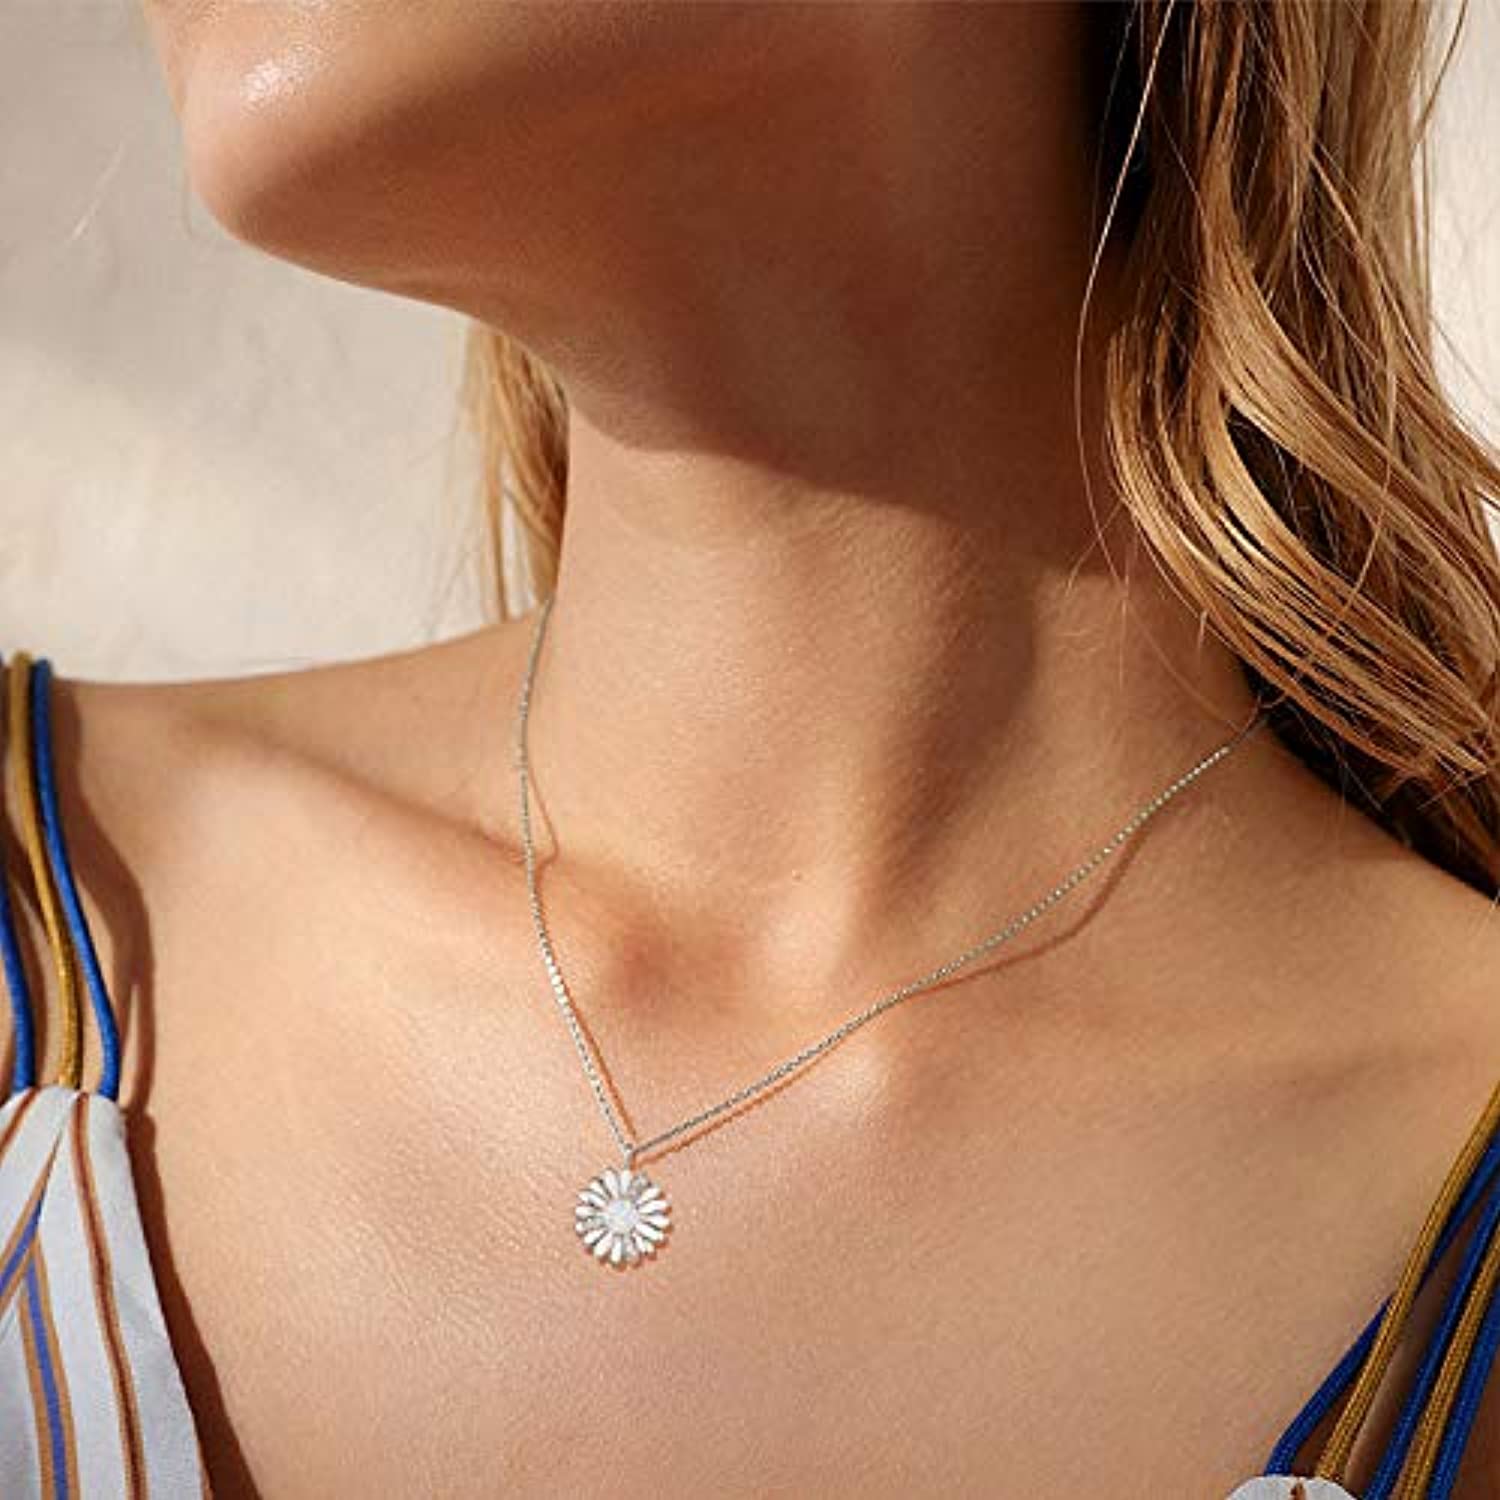 Daisy Flower Necklace For Women 925 Sterling Silver Cubic Zirconia Opal Blossom Daisy Pendant Necklace